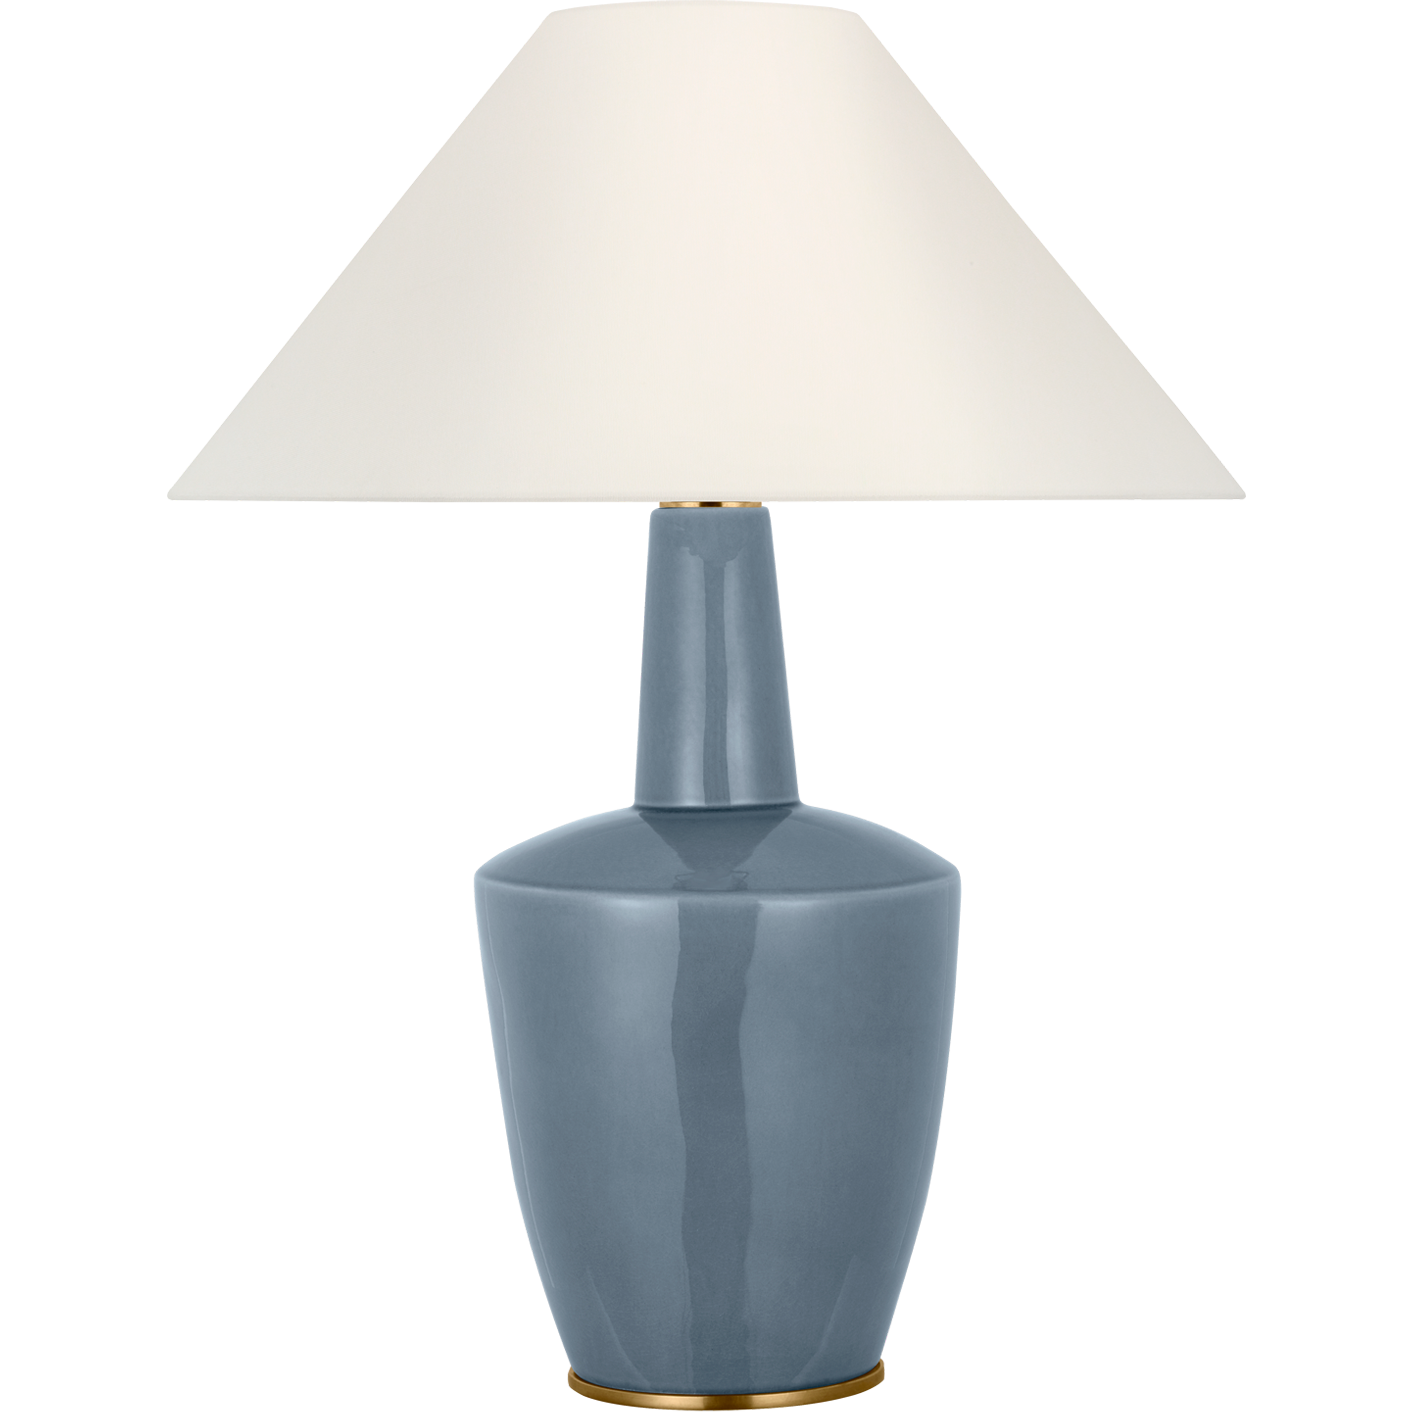 Paros 31" Table Lamp with Coolie Shade